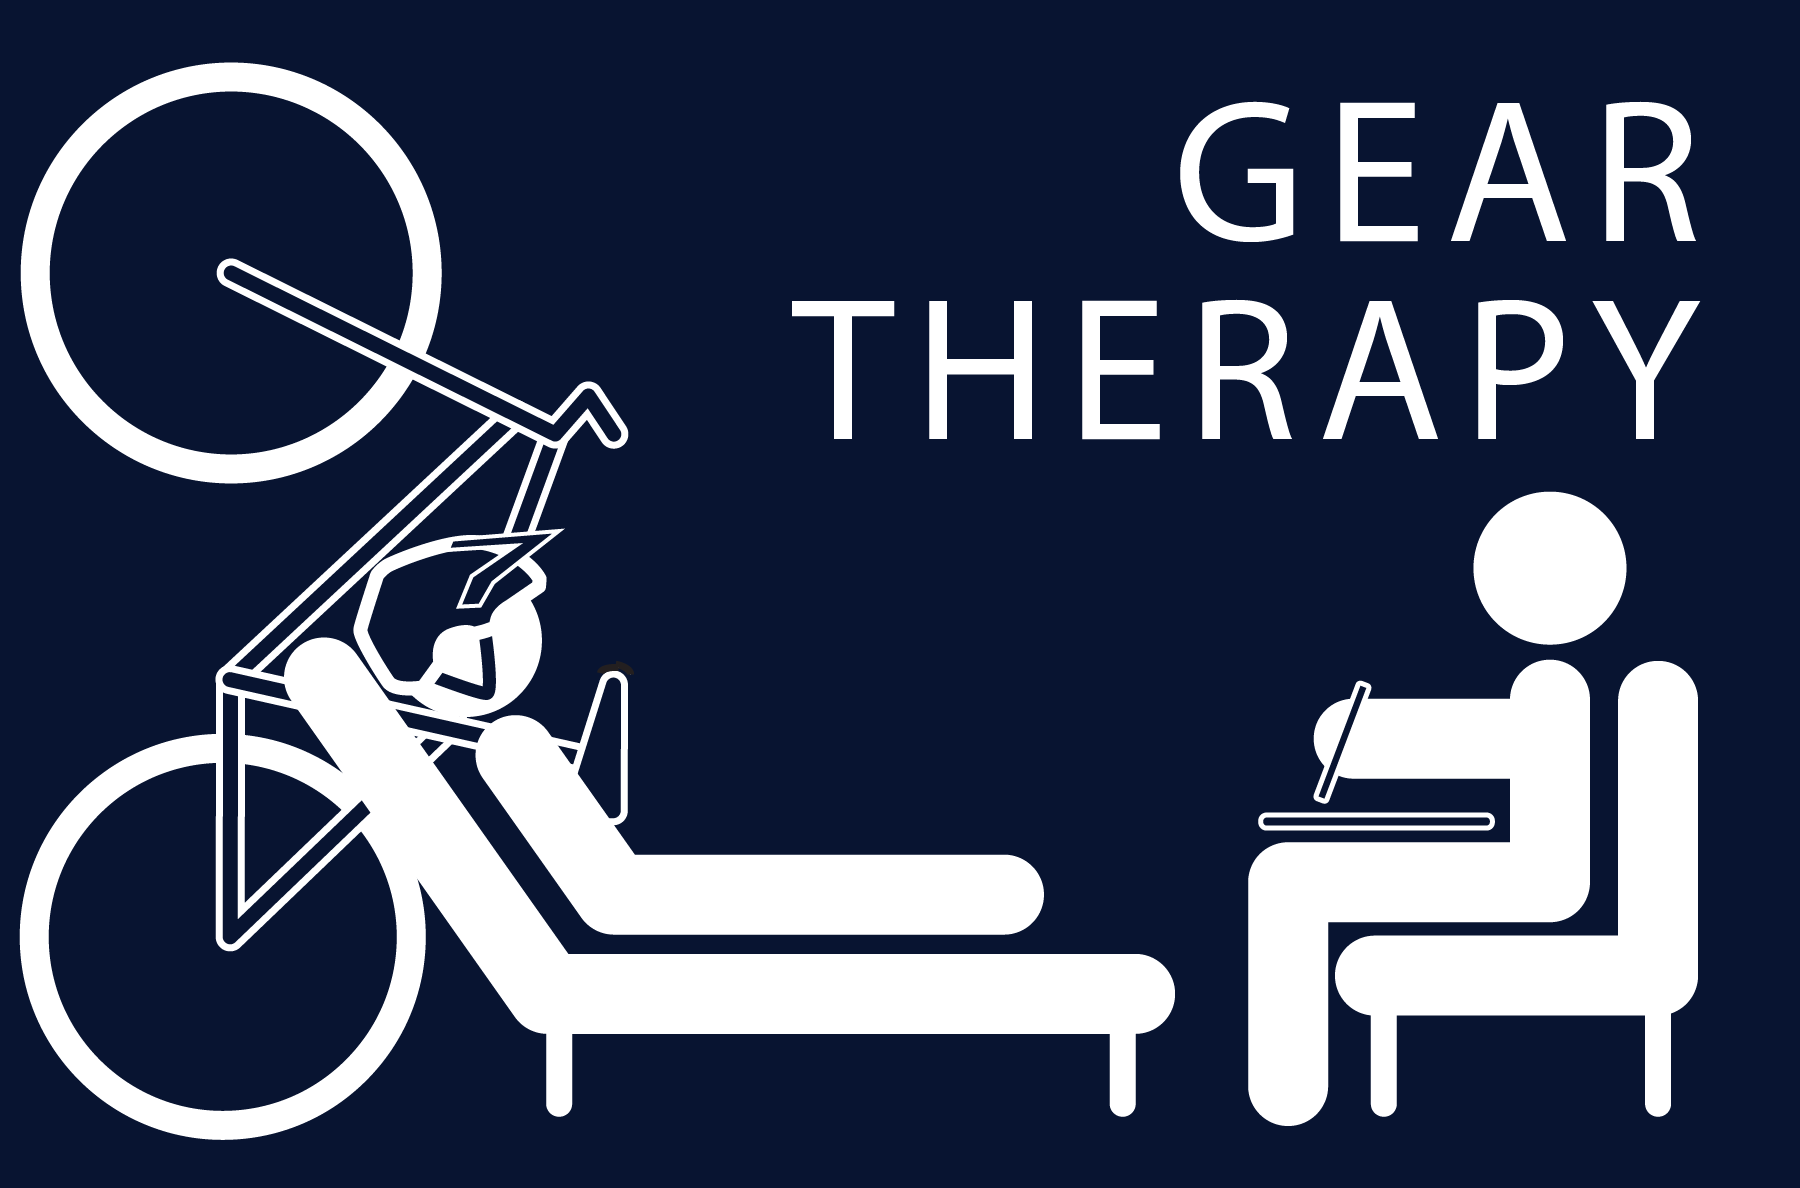 GEAR THERAPY! — Session #1 (Ep.187)